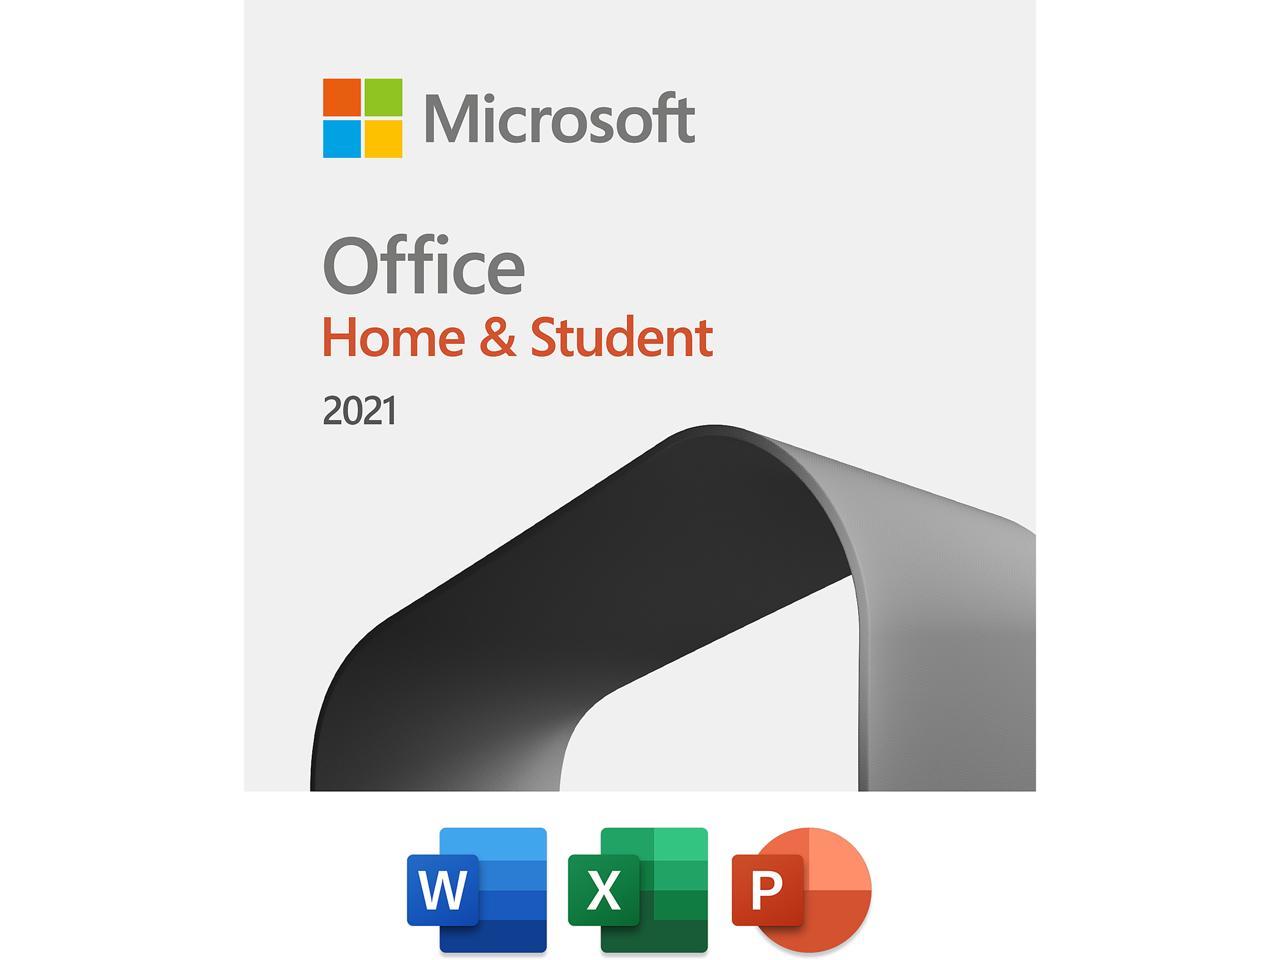 Microsoft Office Home & Student 2021 | One time purchase, 1 device 